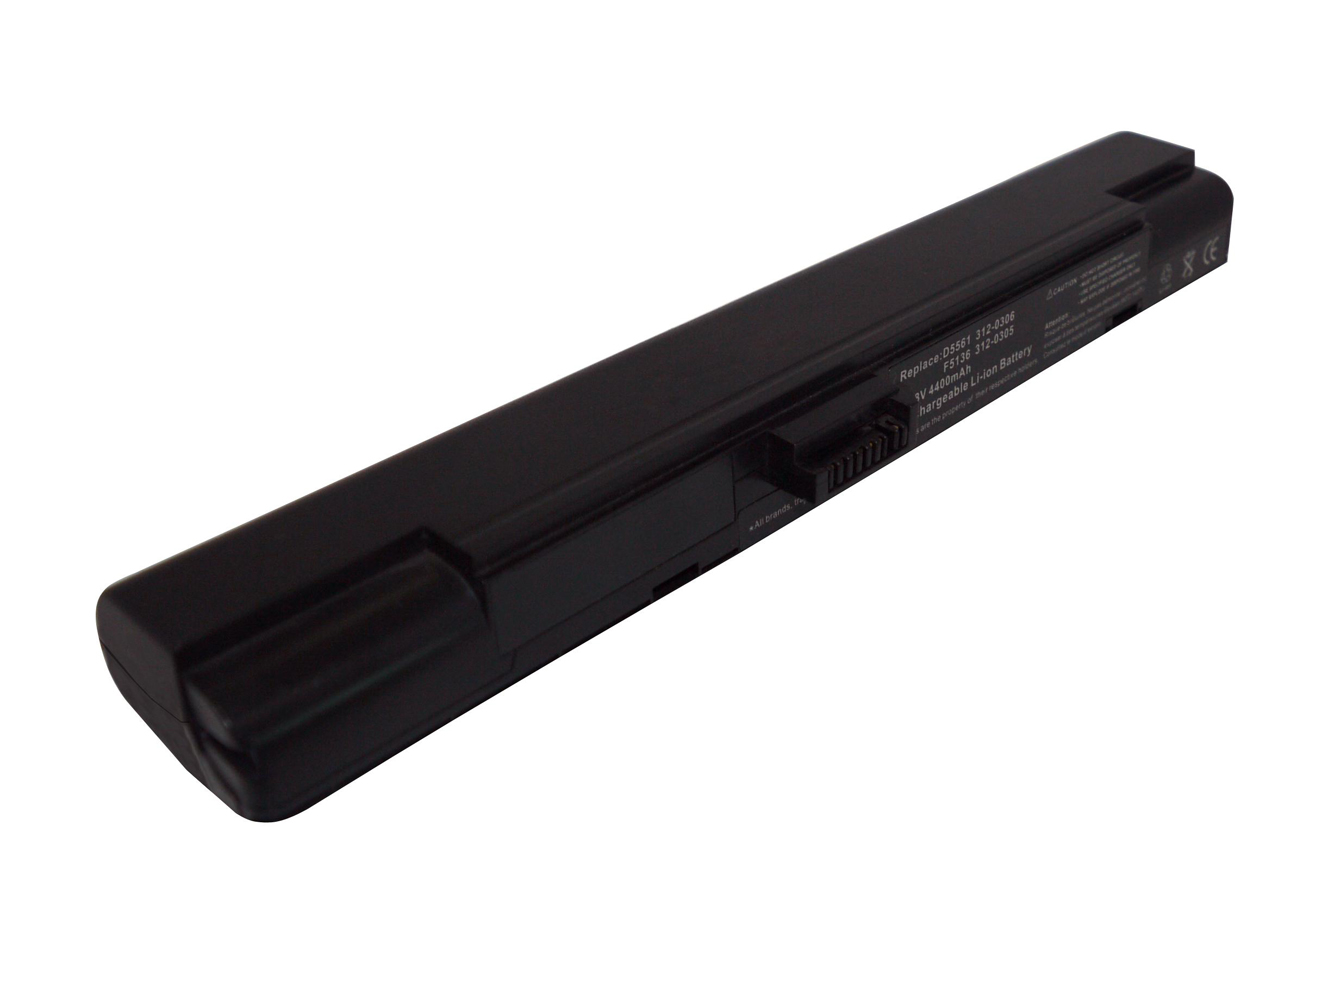 Replacement for Dell Inspiron 700m, Dell Inspiron 710m Laptop Battery